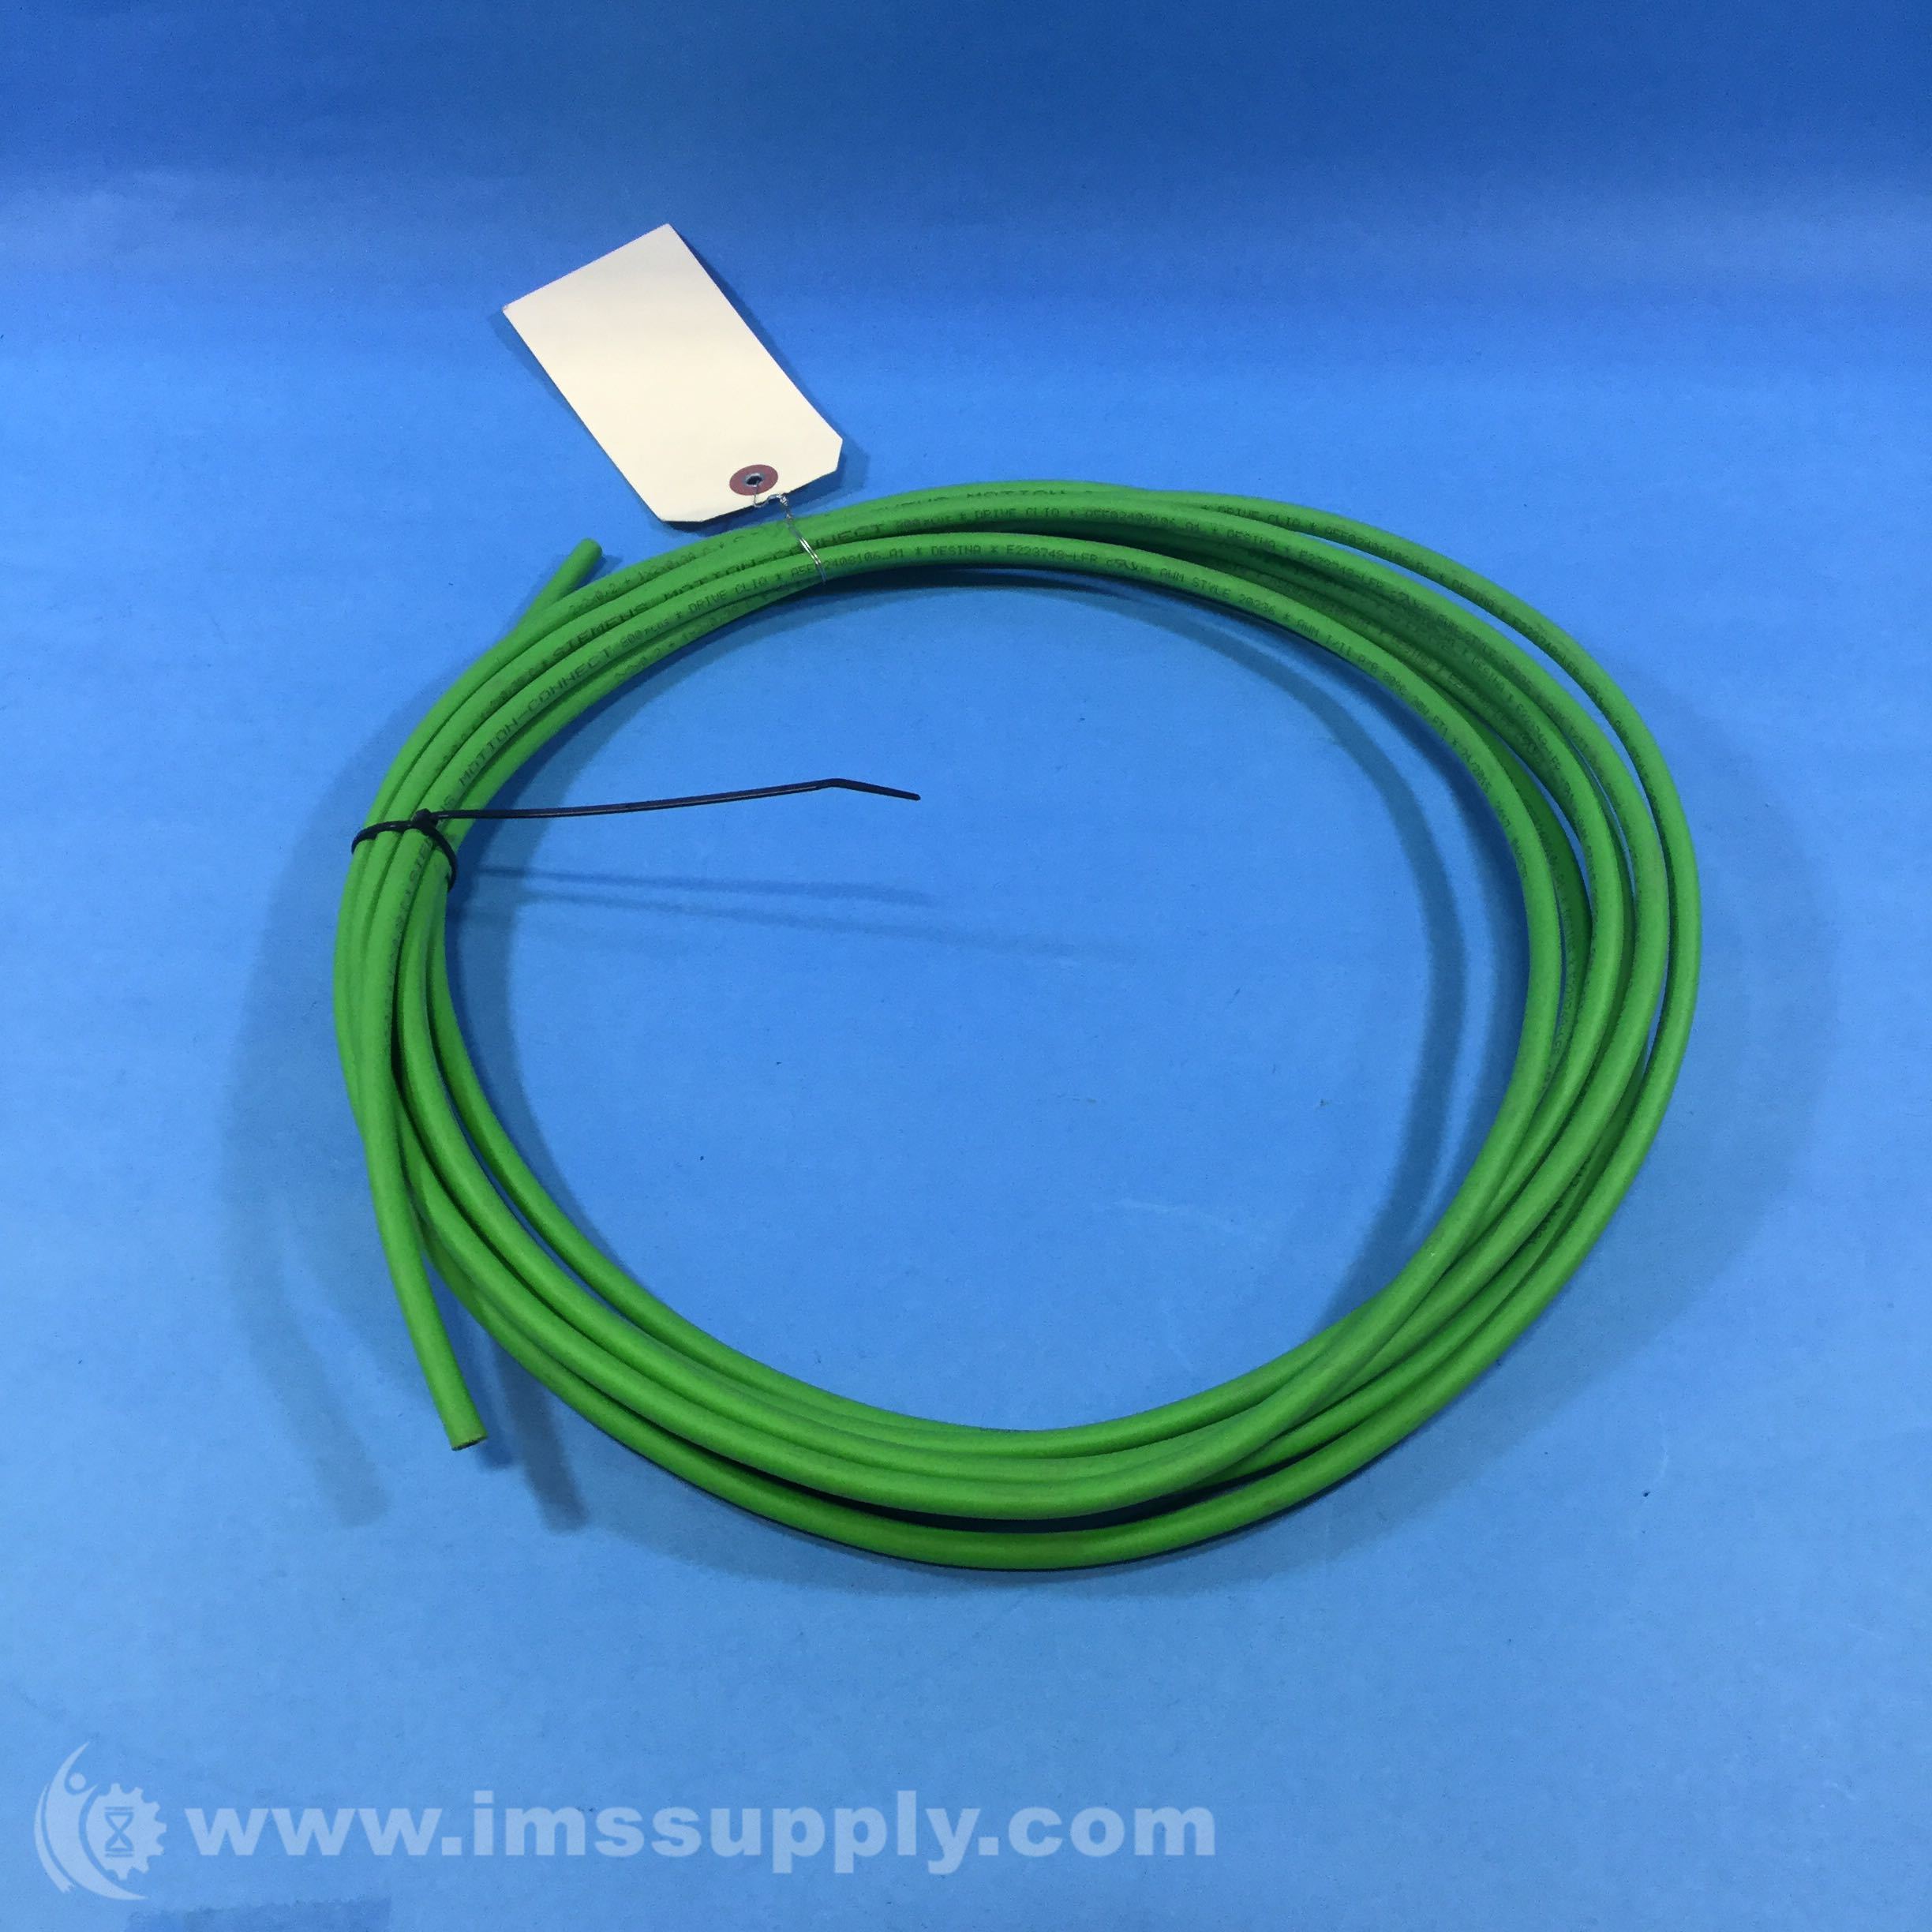 Siemens Cable Assembly - IMS Supply